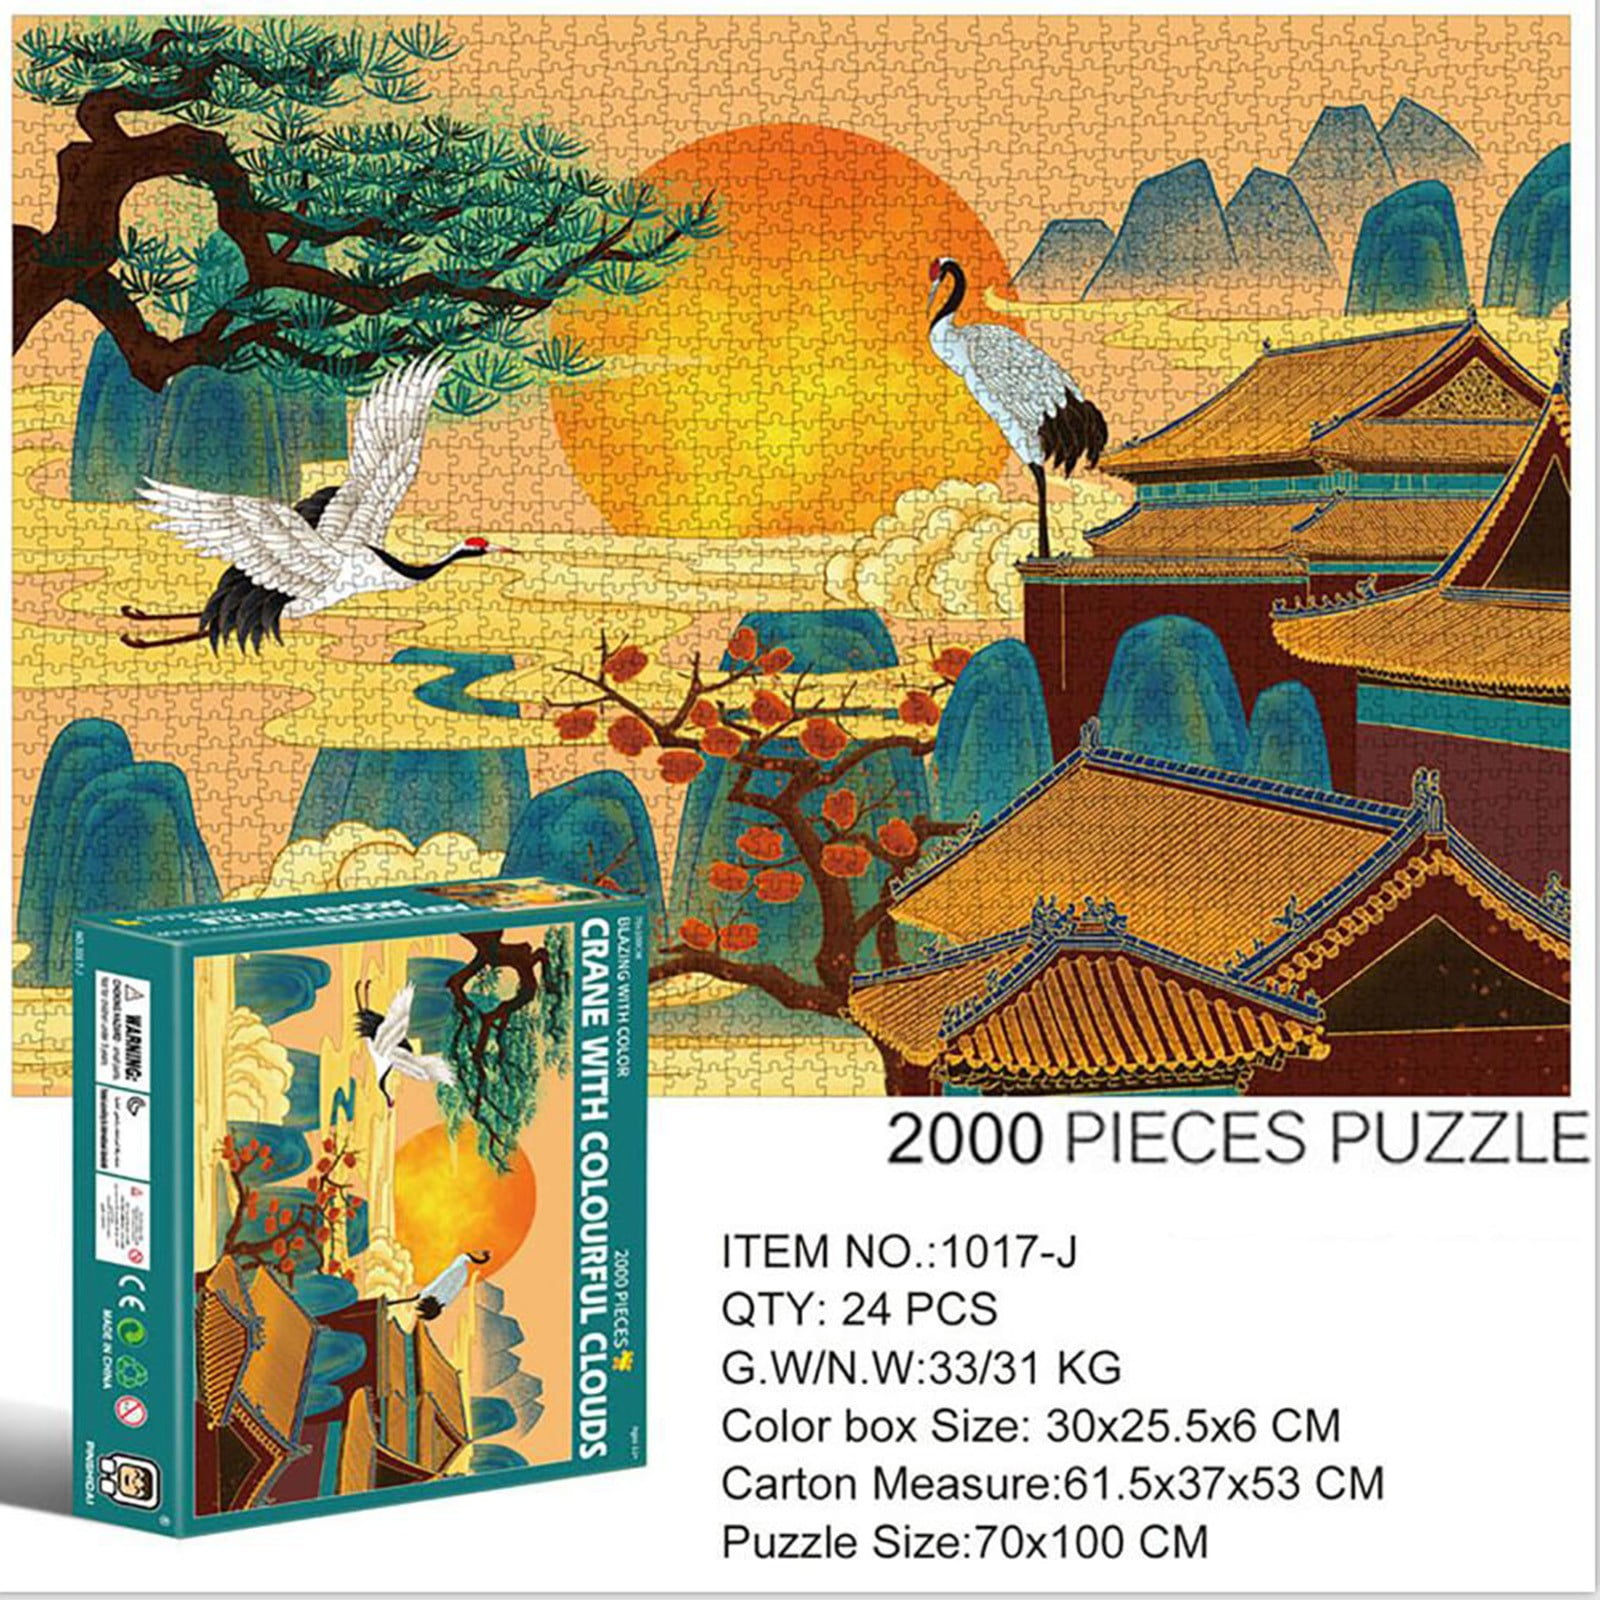 2000 Pieces Wooden Puzzles for Adults-Colored People-Art Leisure Game Fun Toy Suitable Family Friends Decorative Paintings